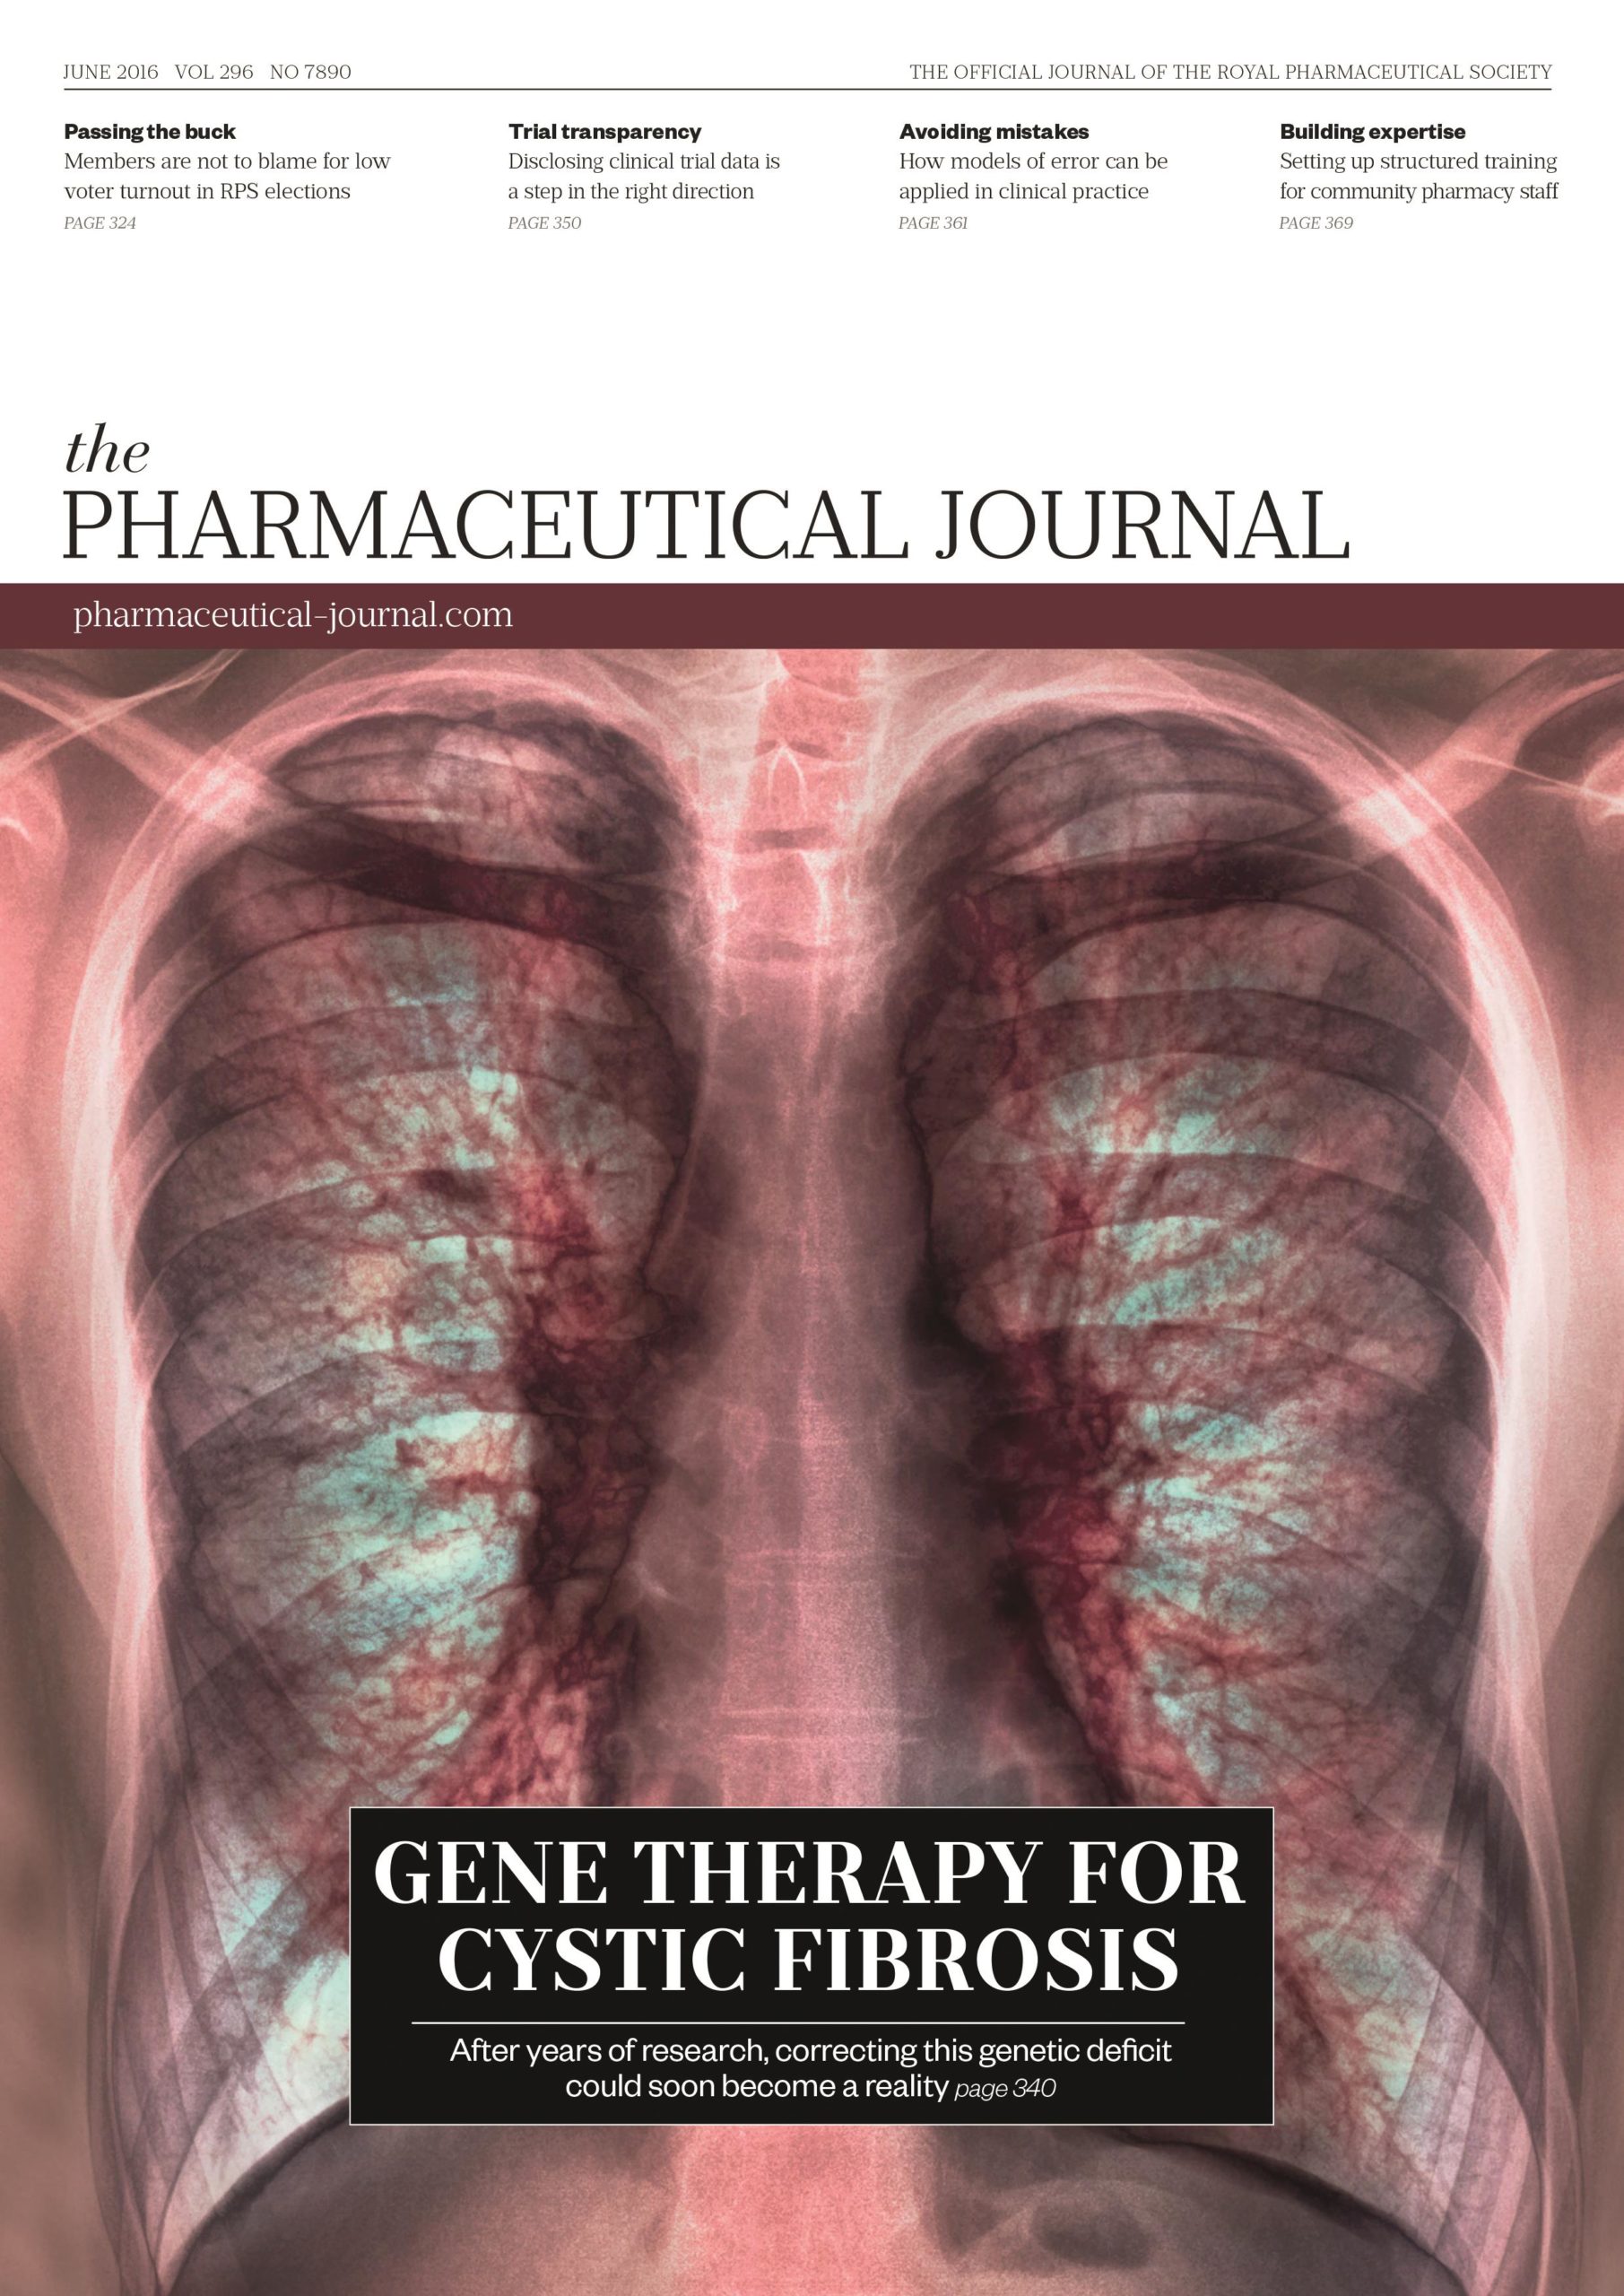 Publication issue cover for PJ, June 2016, Vol 296, No 7890